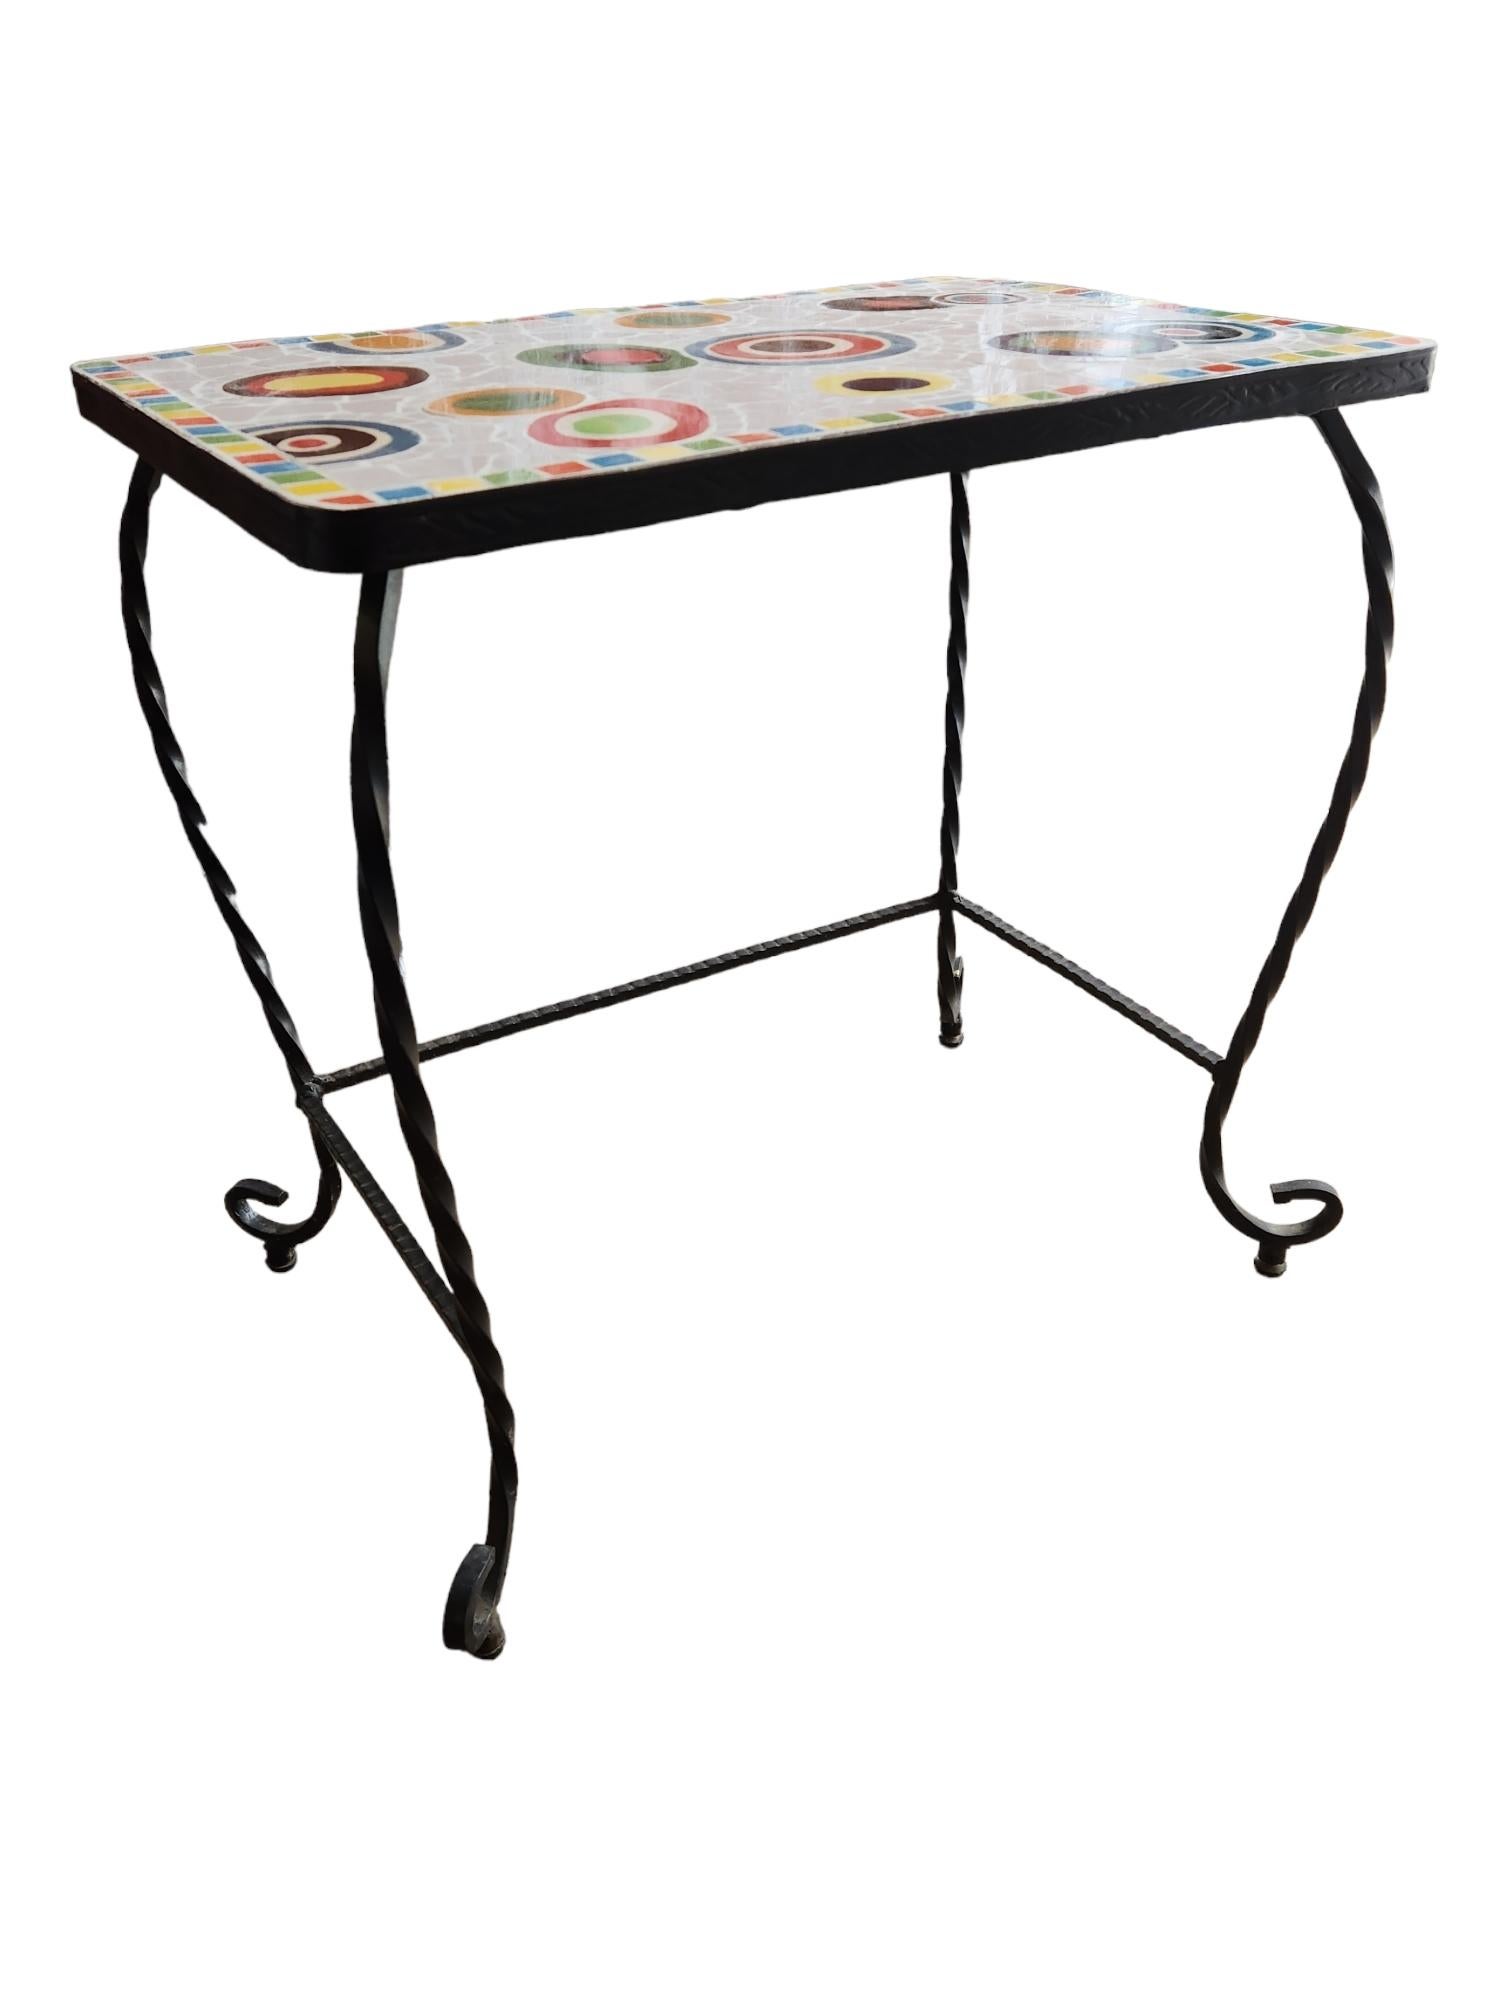 Pair of Twisted Wrought Iron Ceramic Mosaic Side Tables, Italy, 1960 In Good Condition For Sale In Camden, ME